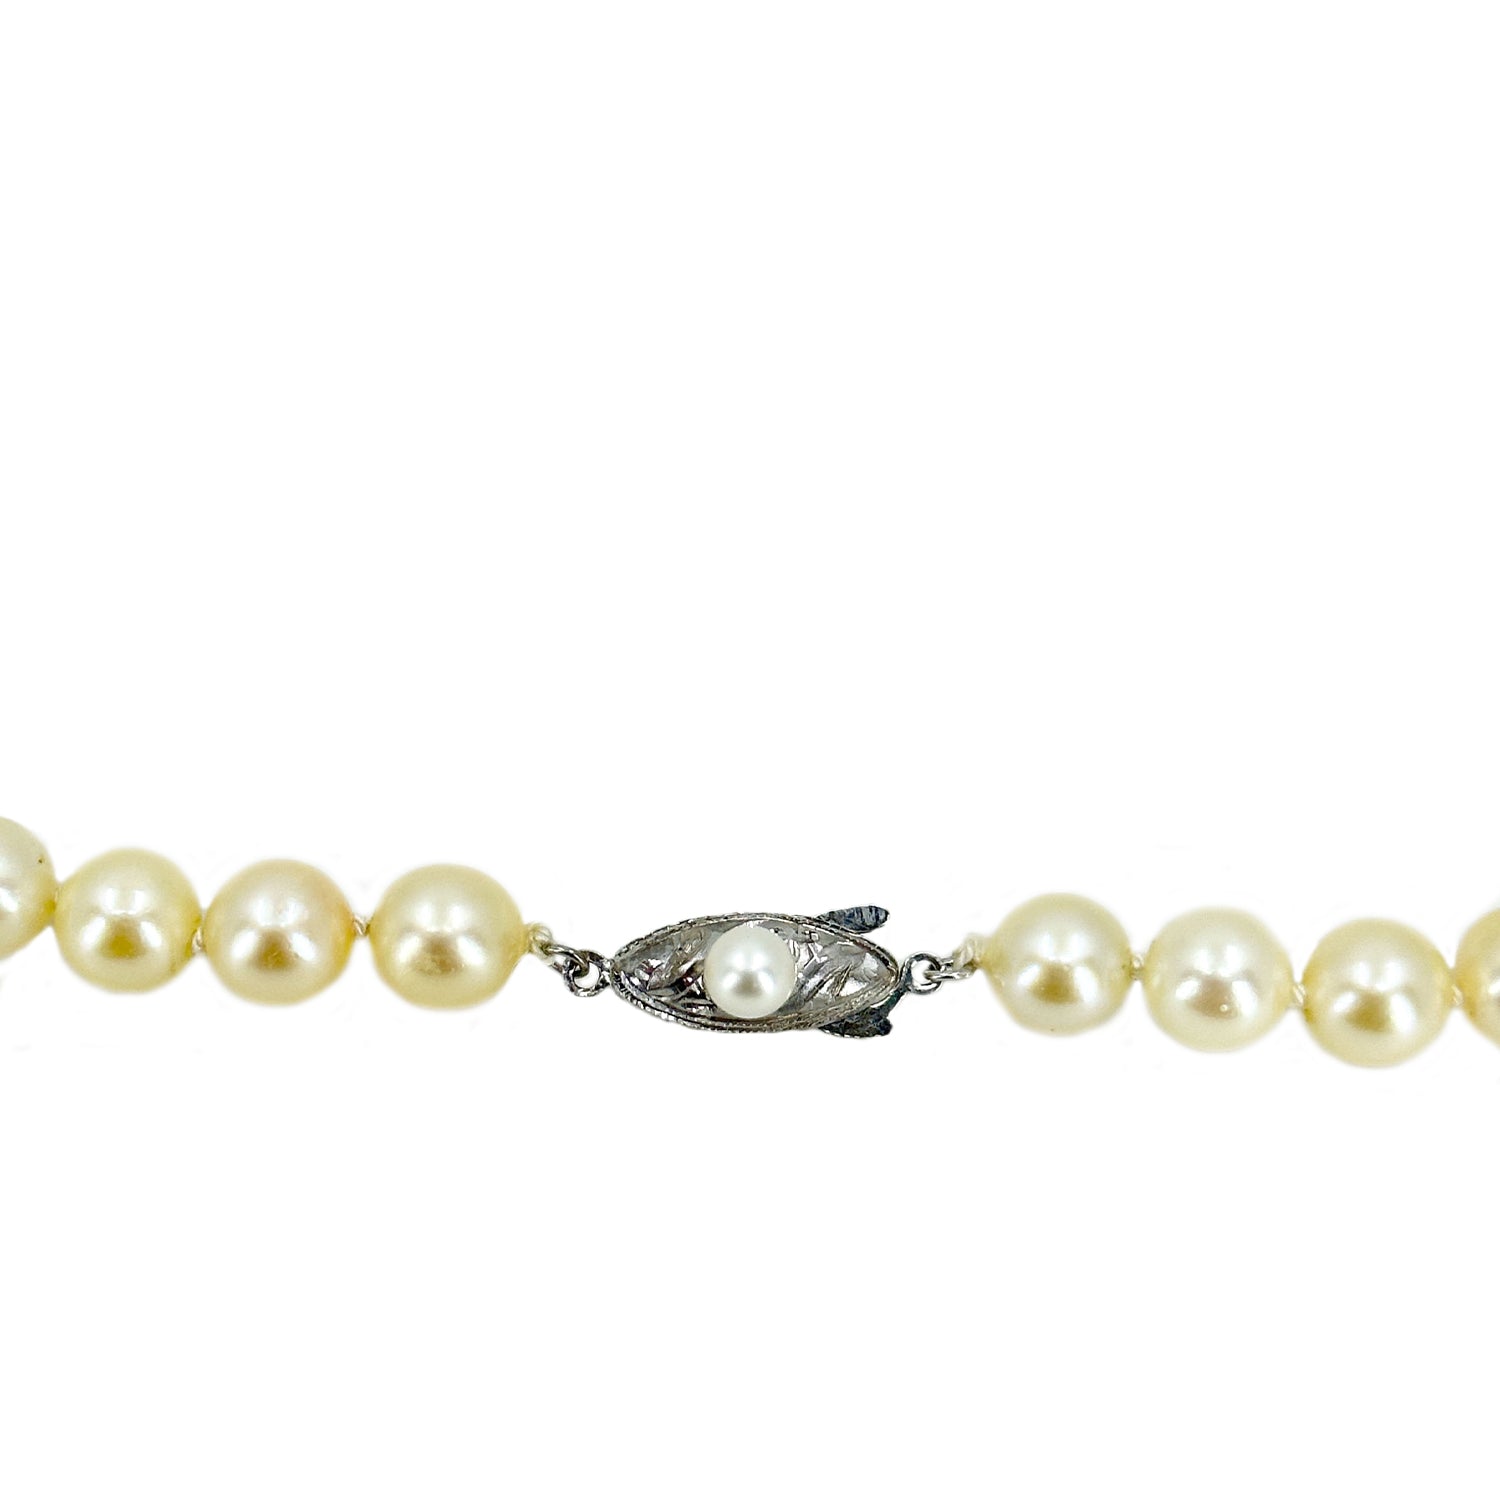 Vintage Cream Choker Japanese Saltwater Cultured Akoya Pearl Necklace - Sterling Silver 15.50 Inch